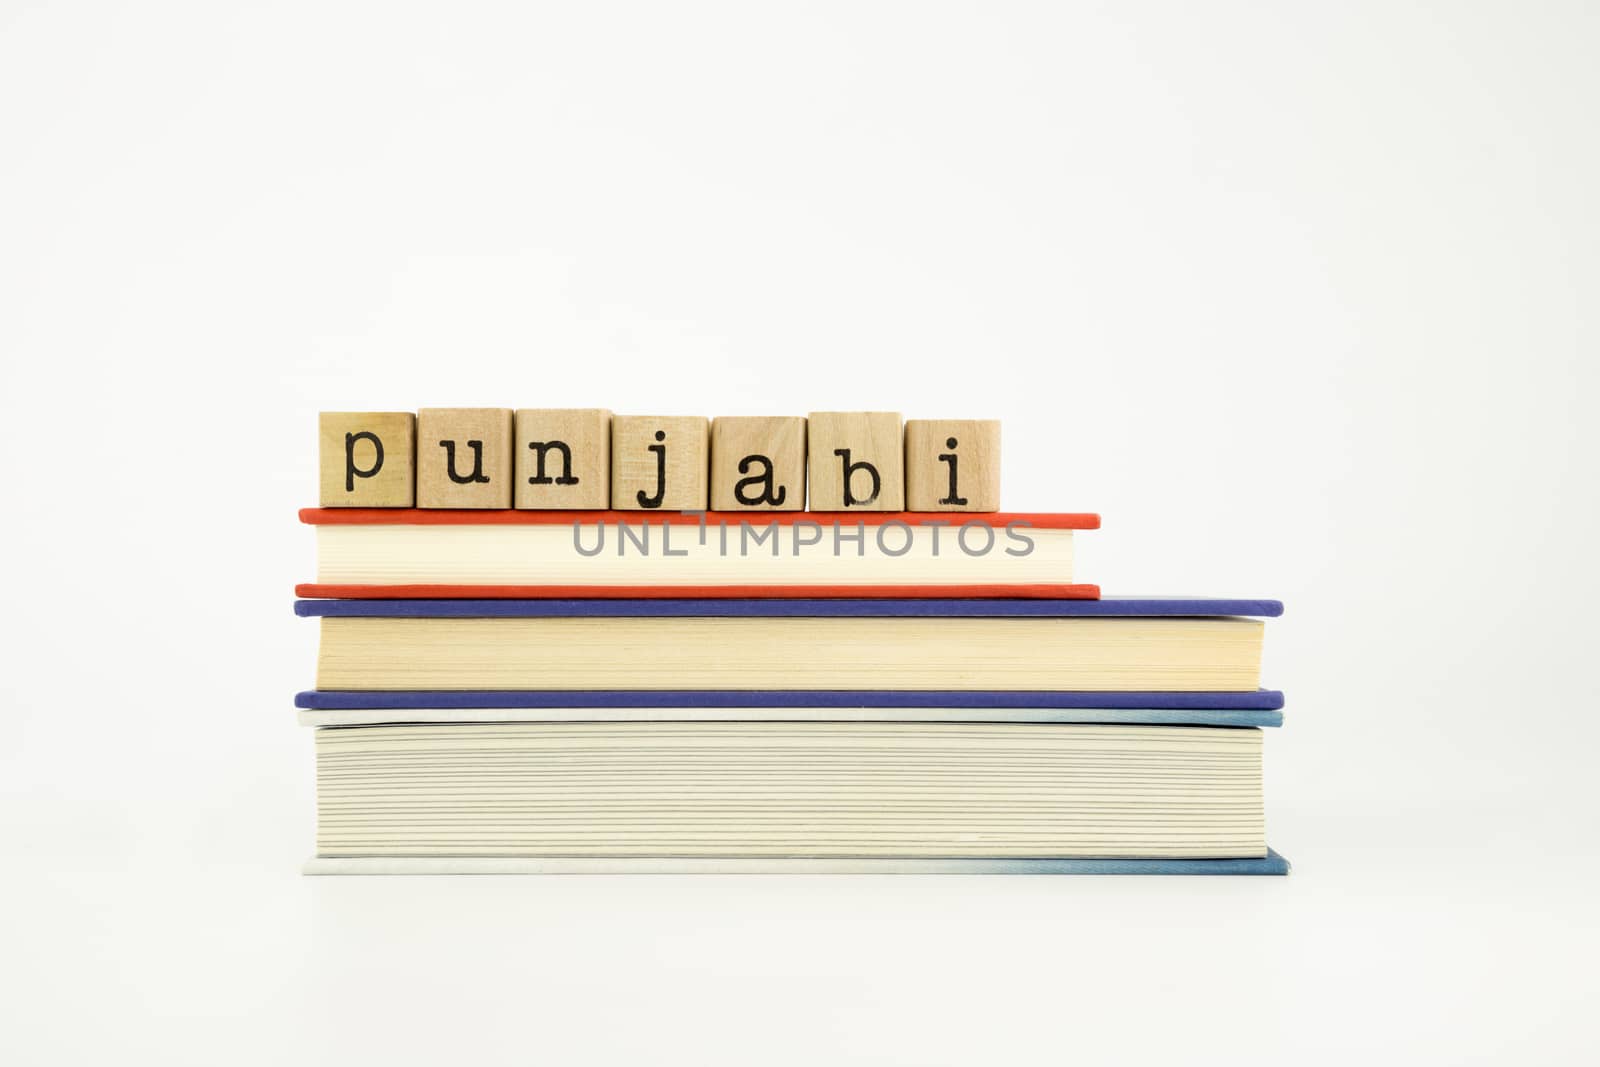 punjabi word on wood stamps stack on books, foreign language and translation concept